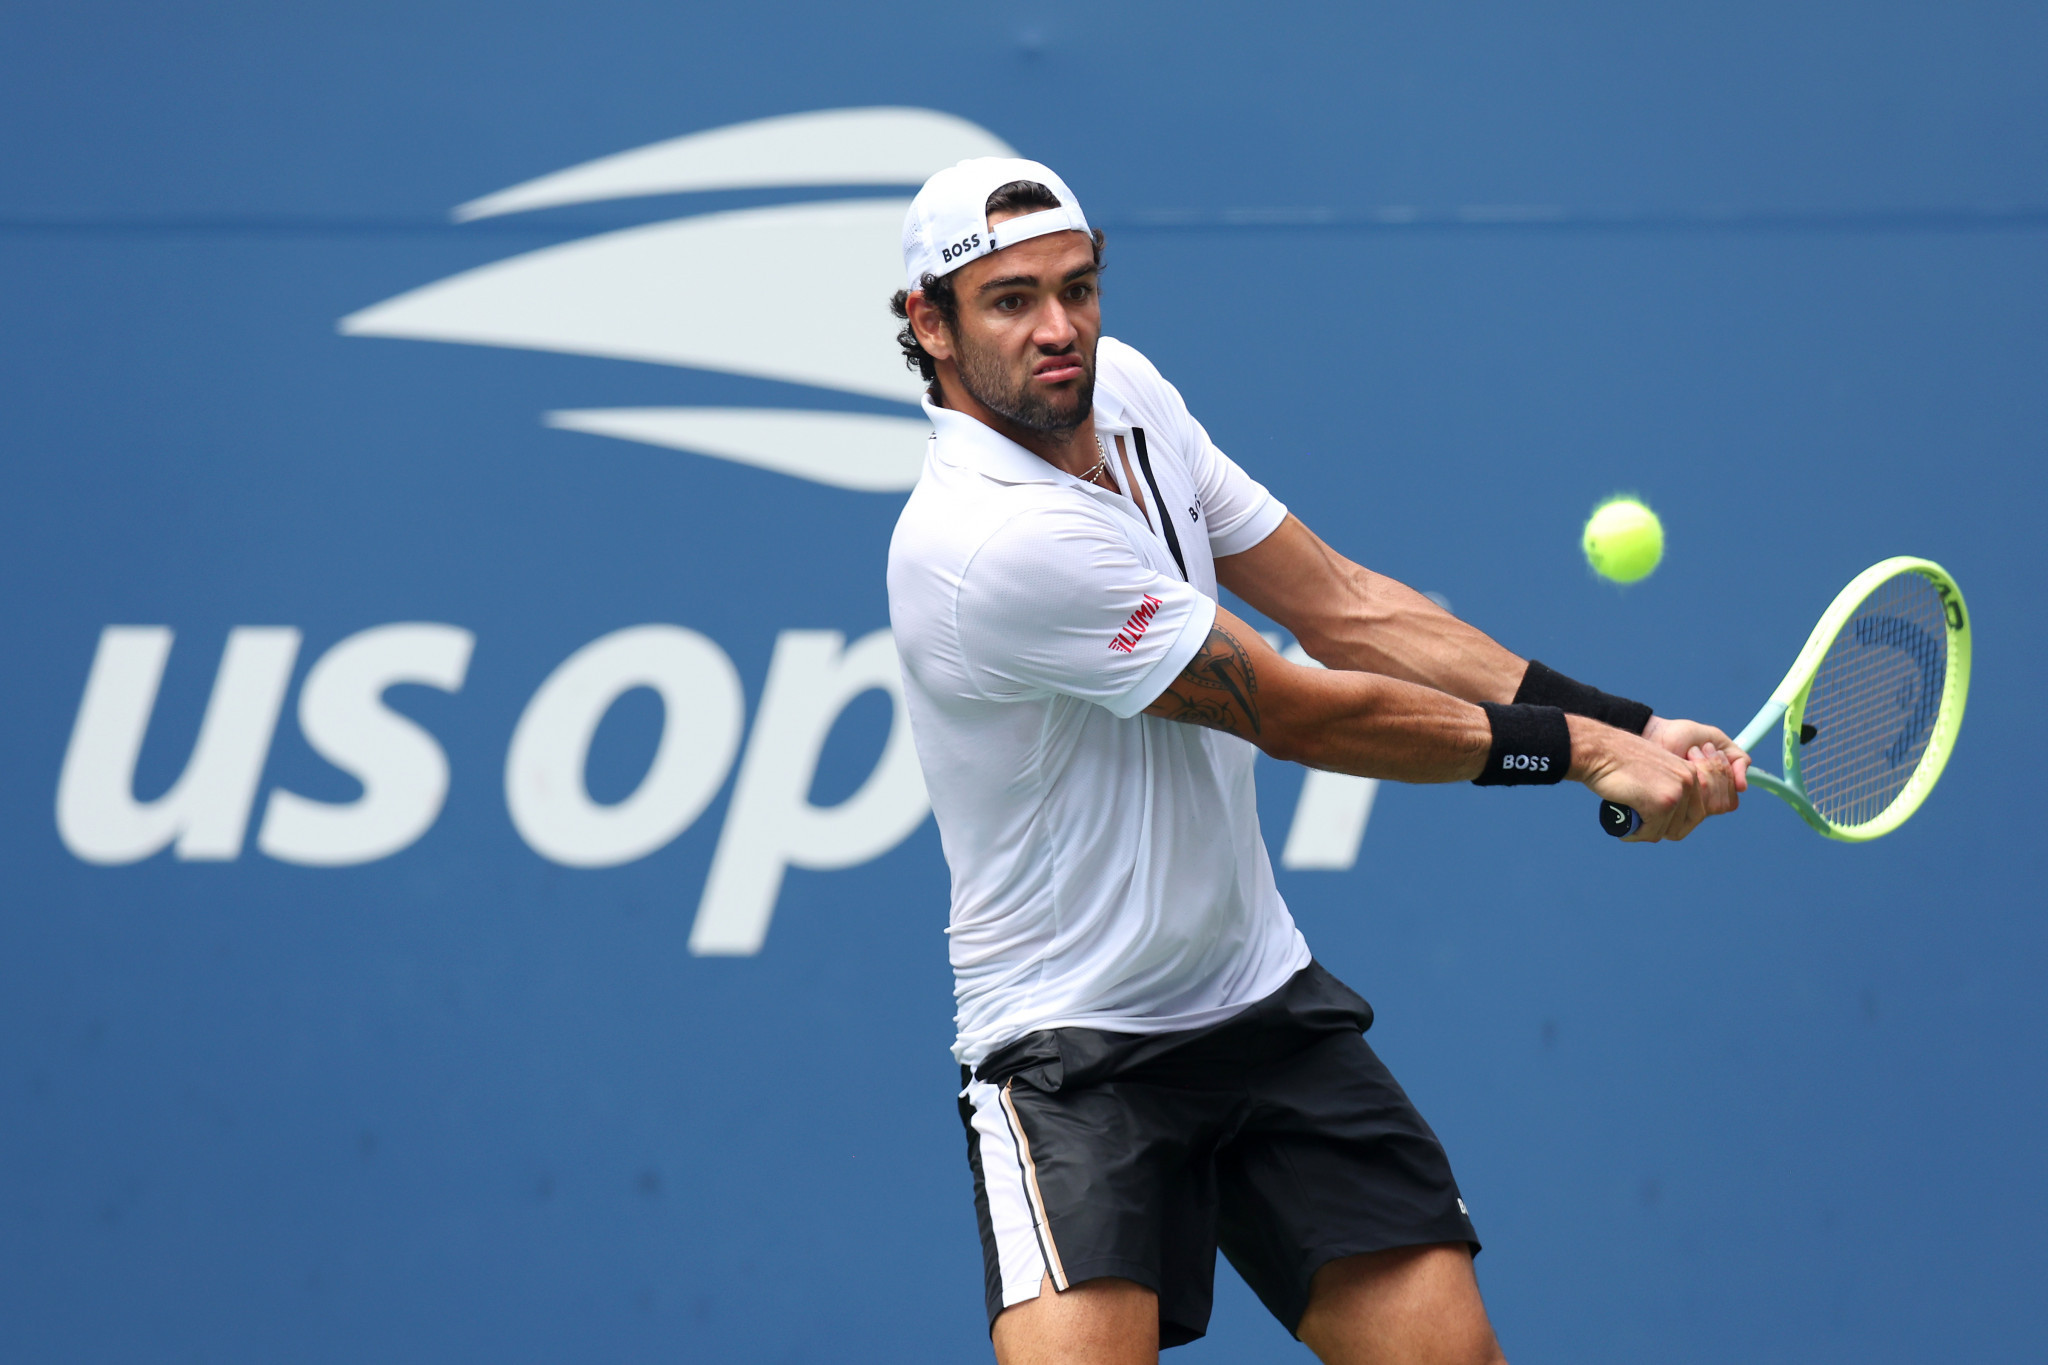 Italy's Matteo Berrettini will play Ruud in the quarter-finals following a five-set win ©Getty Images